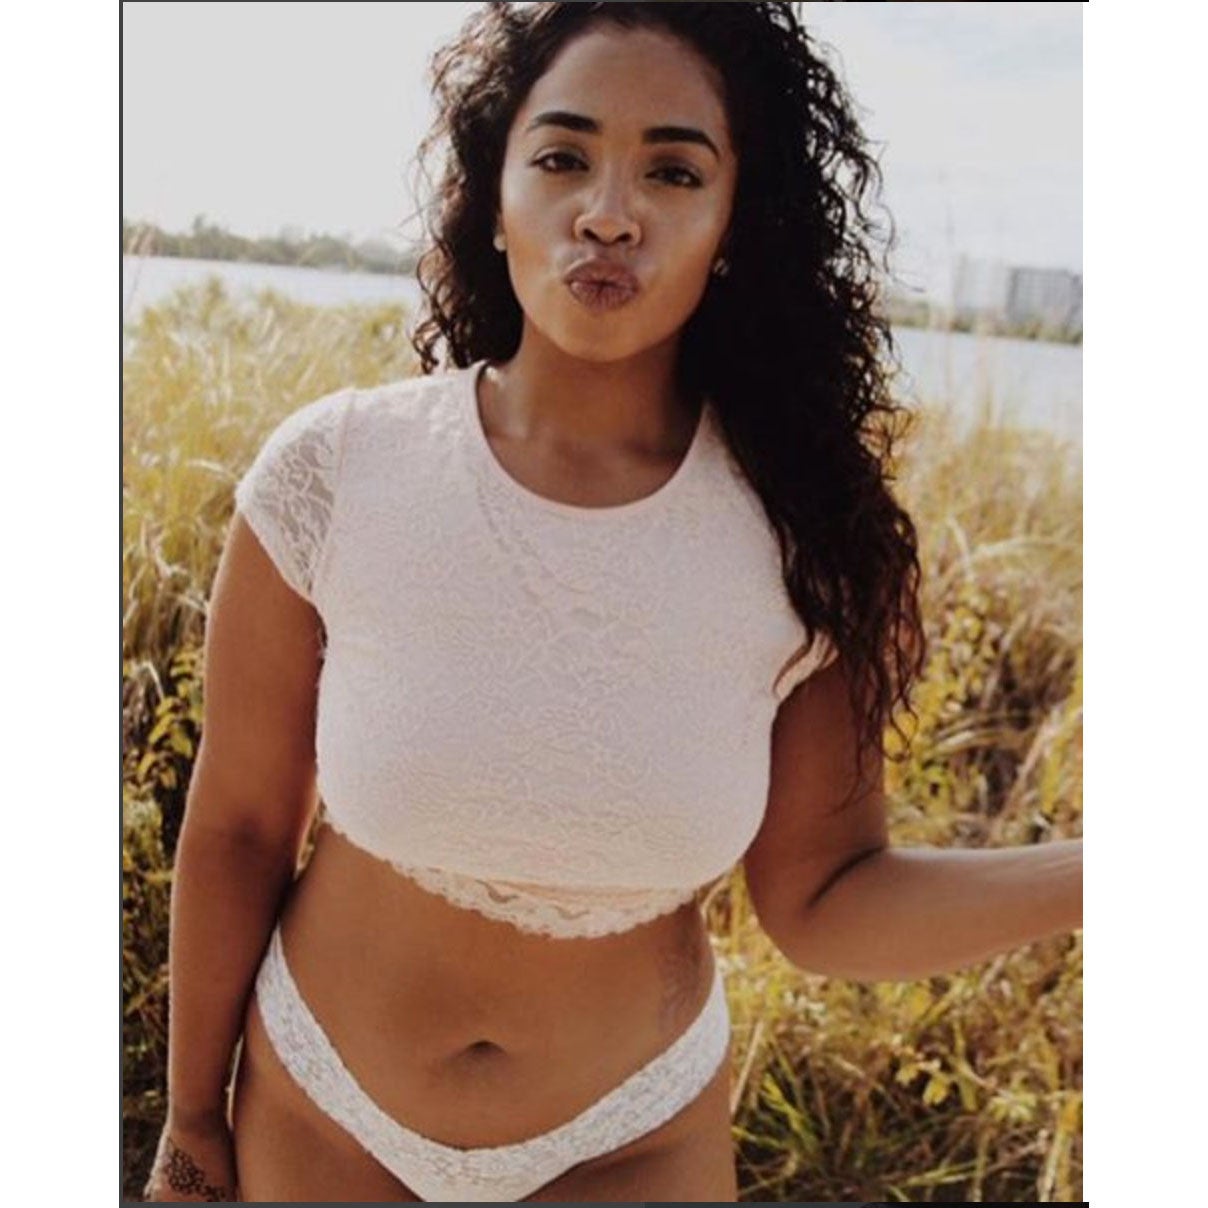 Beautiful Black Women Confidently Rocking Their Underwear And Looking Too Hot To Cover Up 